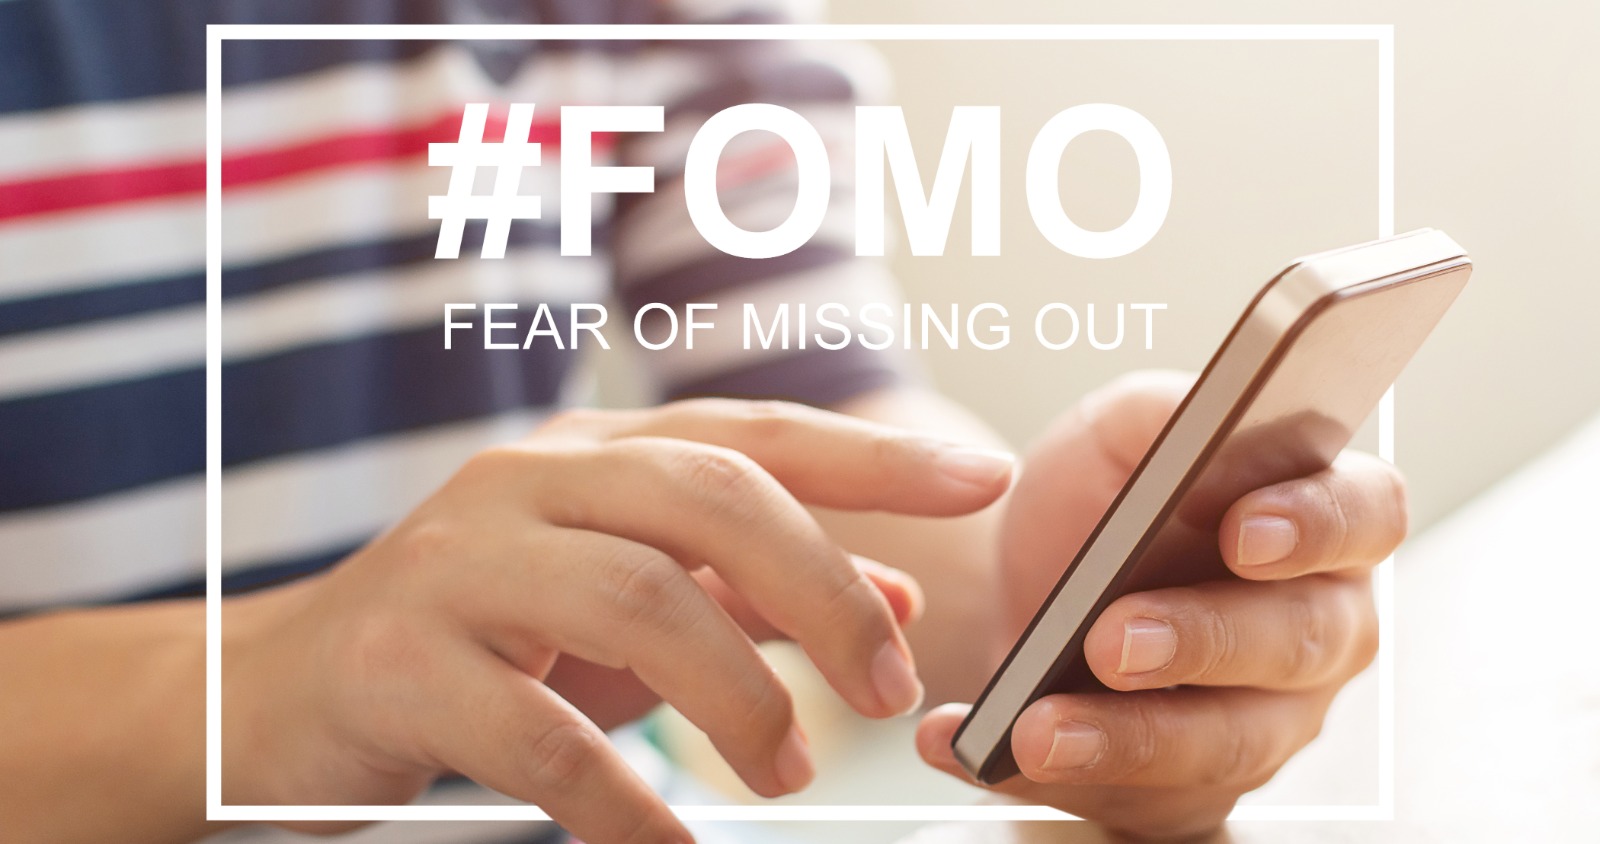 the fear of missing out